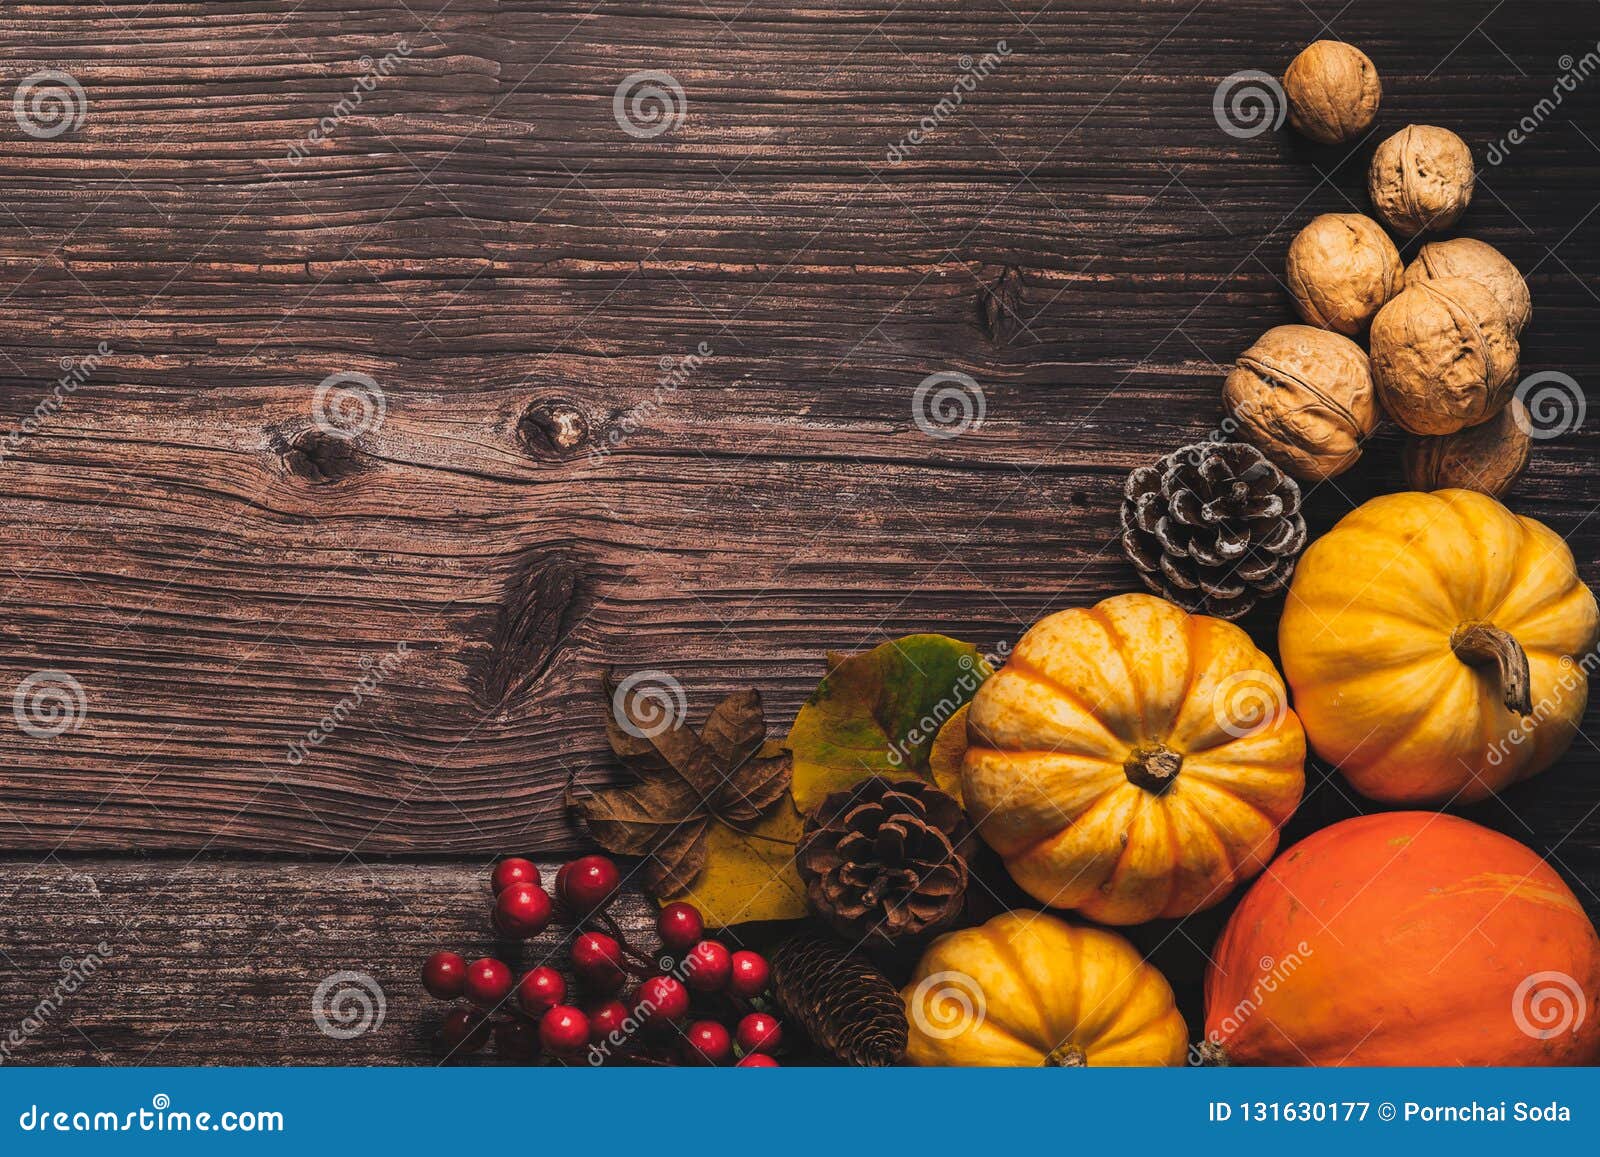 Happy Thanksgiving Day with Pumpkin and Nut on Wooden Table Stock Image ...